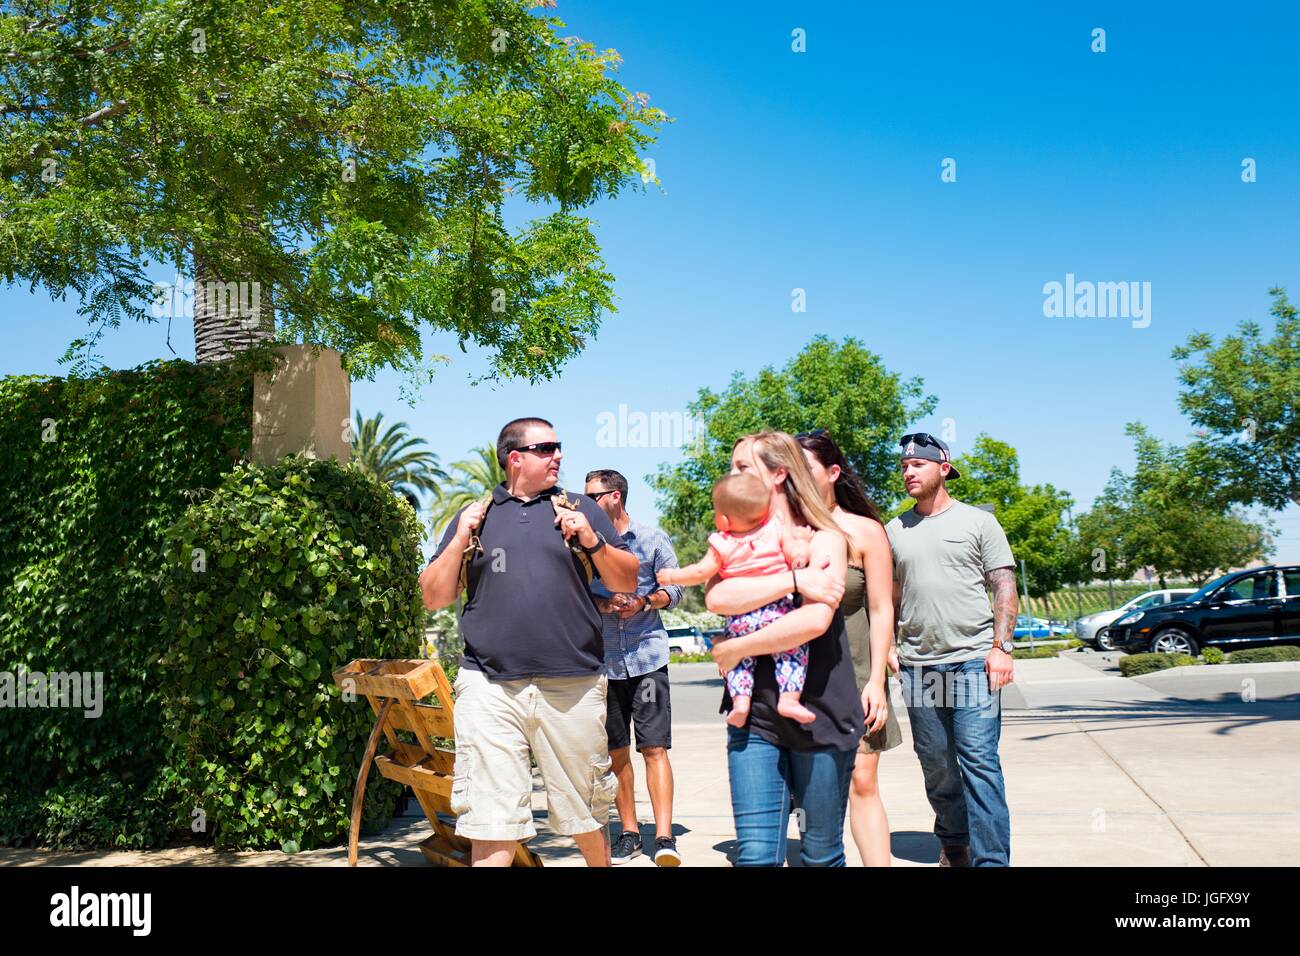 A family with a young child enters the grounds at Wente winery in Livermore Wine Country, Livermore, California, June 25, 2017. Founded in 1883, Wente is the United States' oldest continuously operating family owned vineyard. Stock Photo